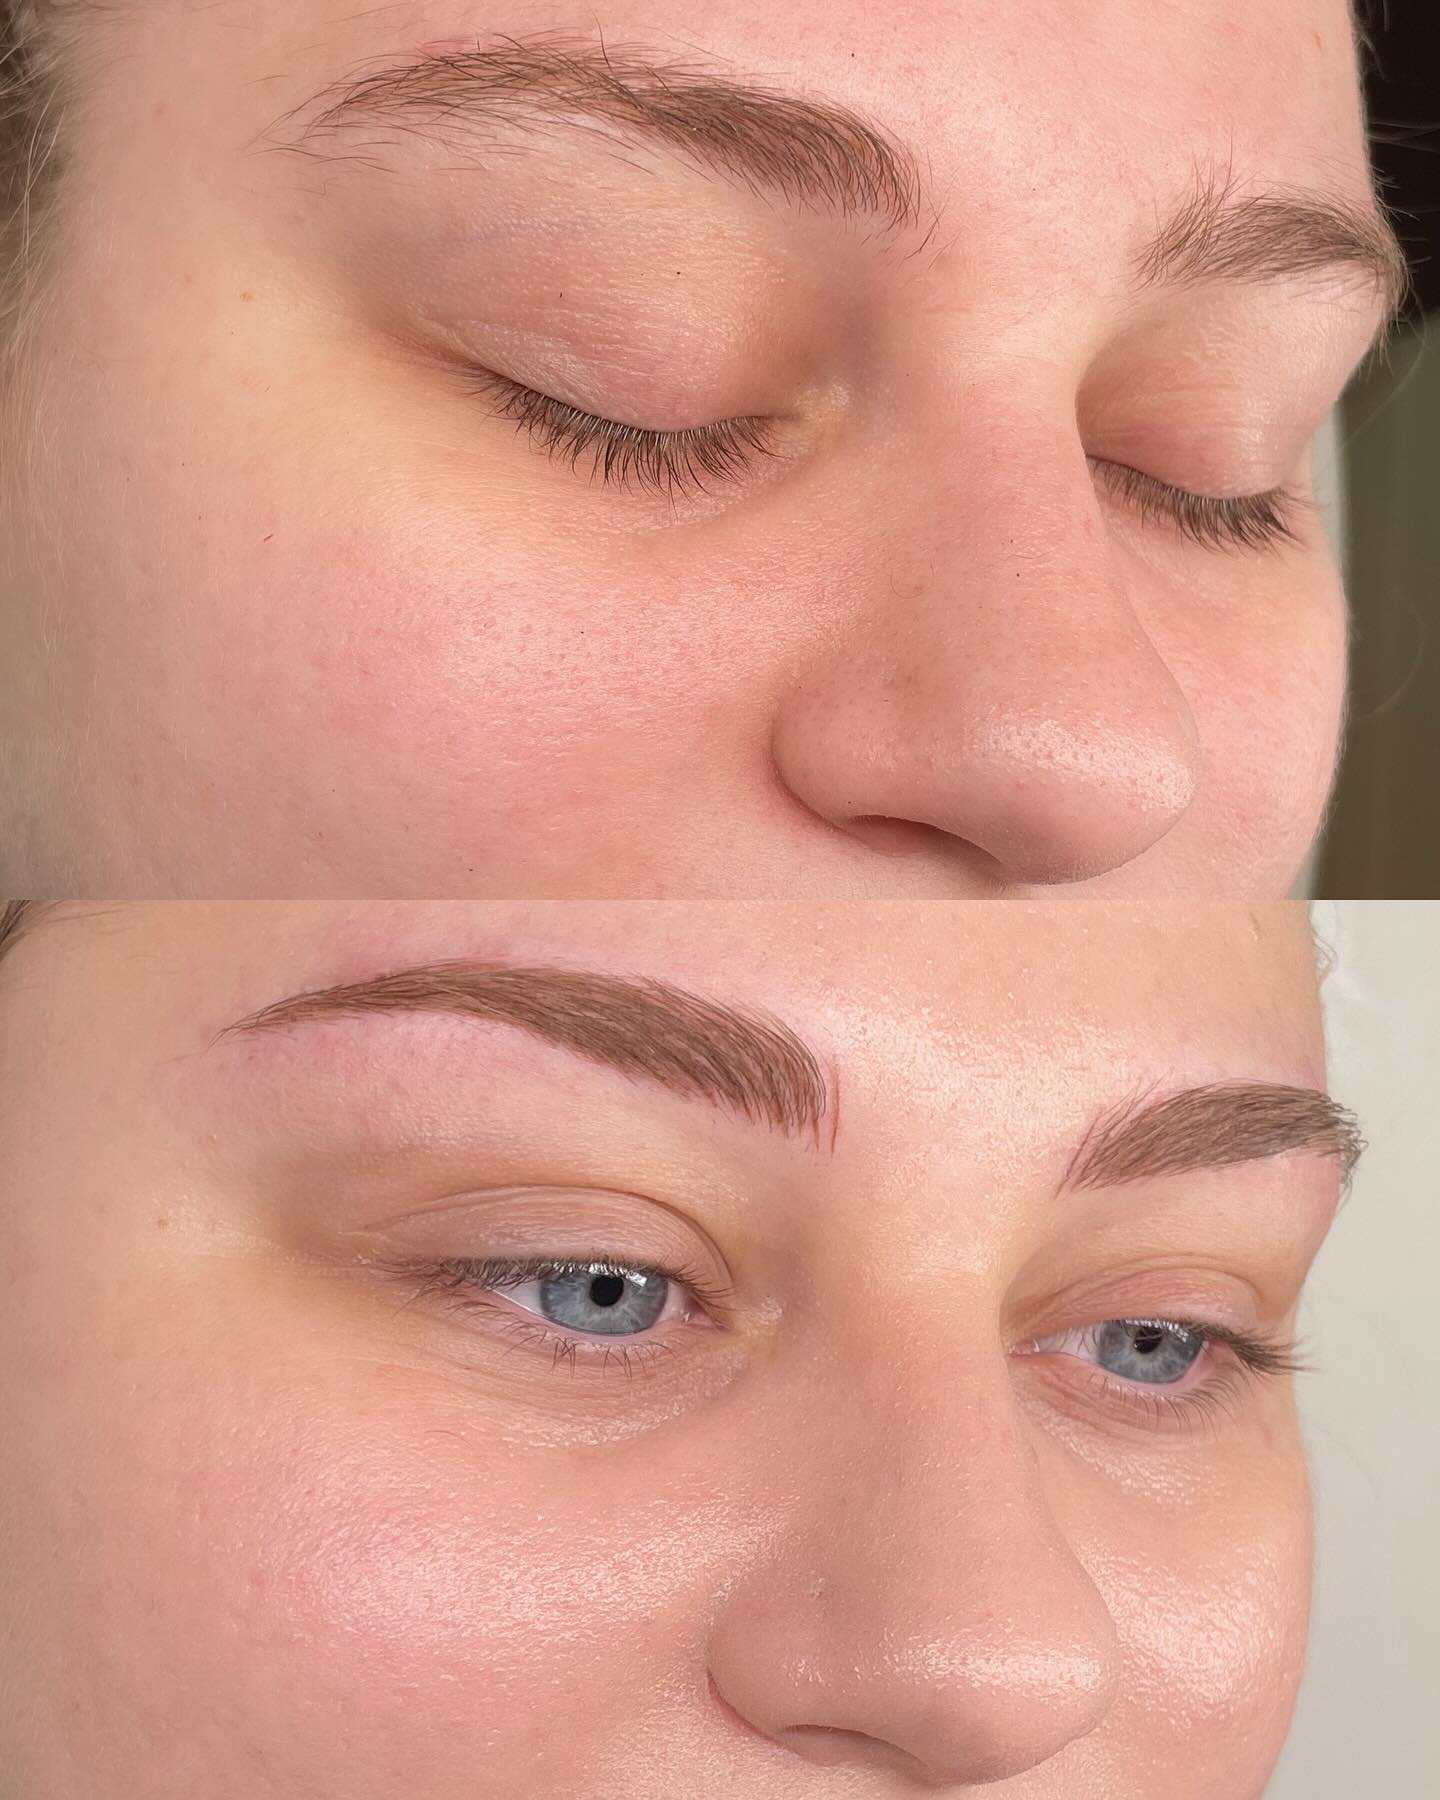 Nano stroke and combo shading brows 🤩🤩🤩 stunningly bold results by request of my gorgeous client 👏🥹🫶 

I mean WOW ❤️ 

#nanostrokeswithshading #combobrows #machinehairstrokes #pmu #pmuartist #duncan #vancouverisland #cowichanvalley #eyebrows #b